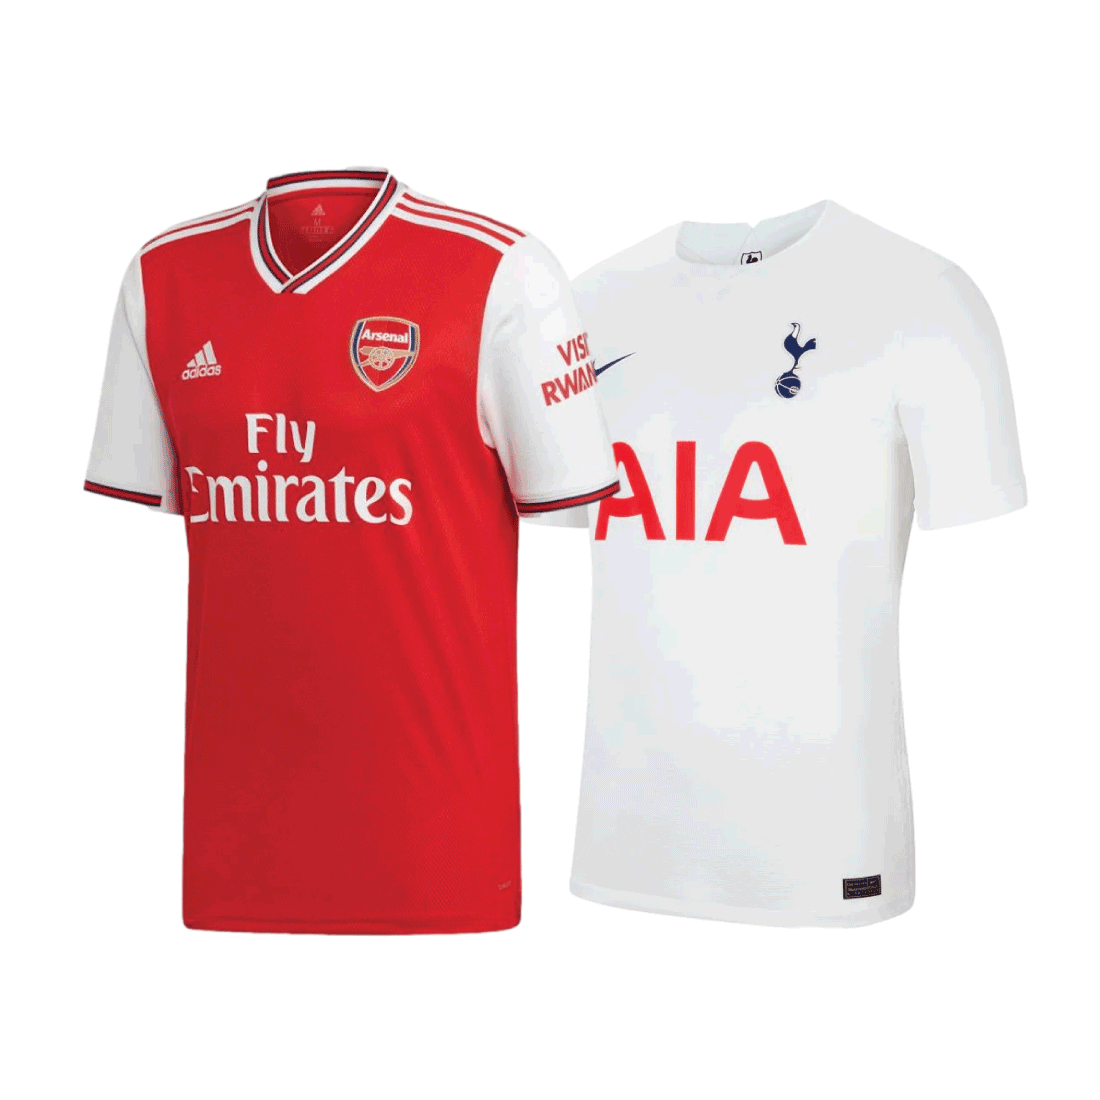 Arsenal and Tottenham Jerseys - Get your favorite club jerseys here. Maybe not Spurs.